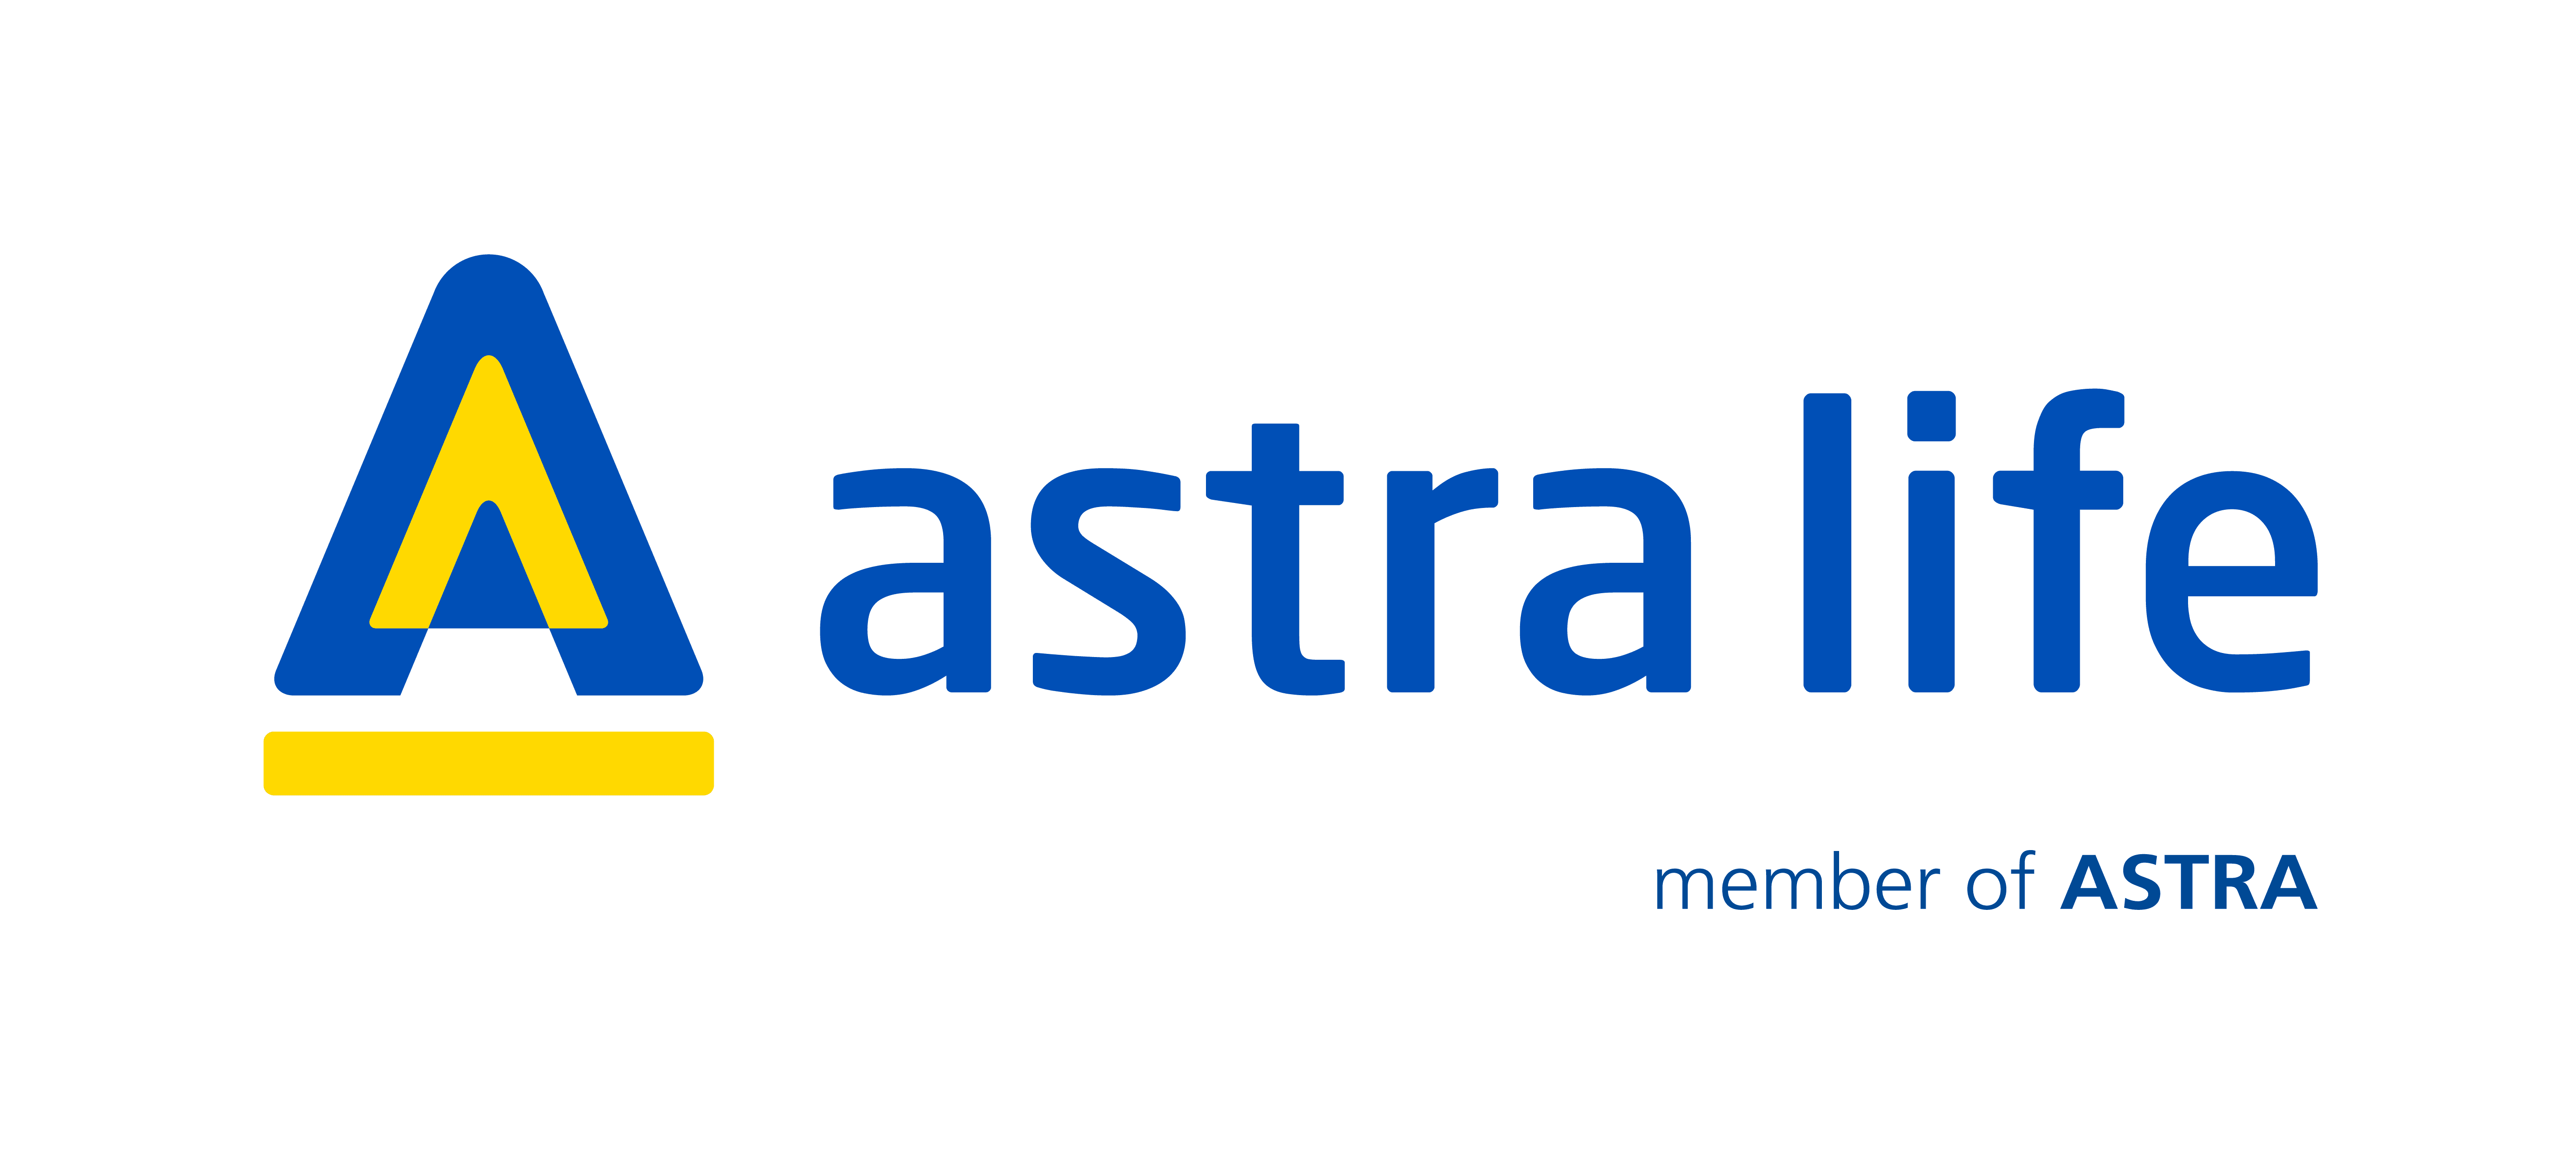 Astra Life Member of ASTRA